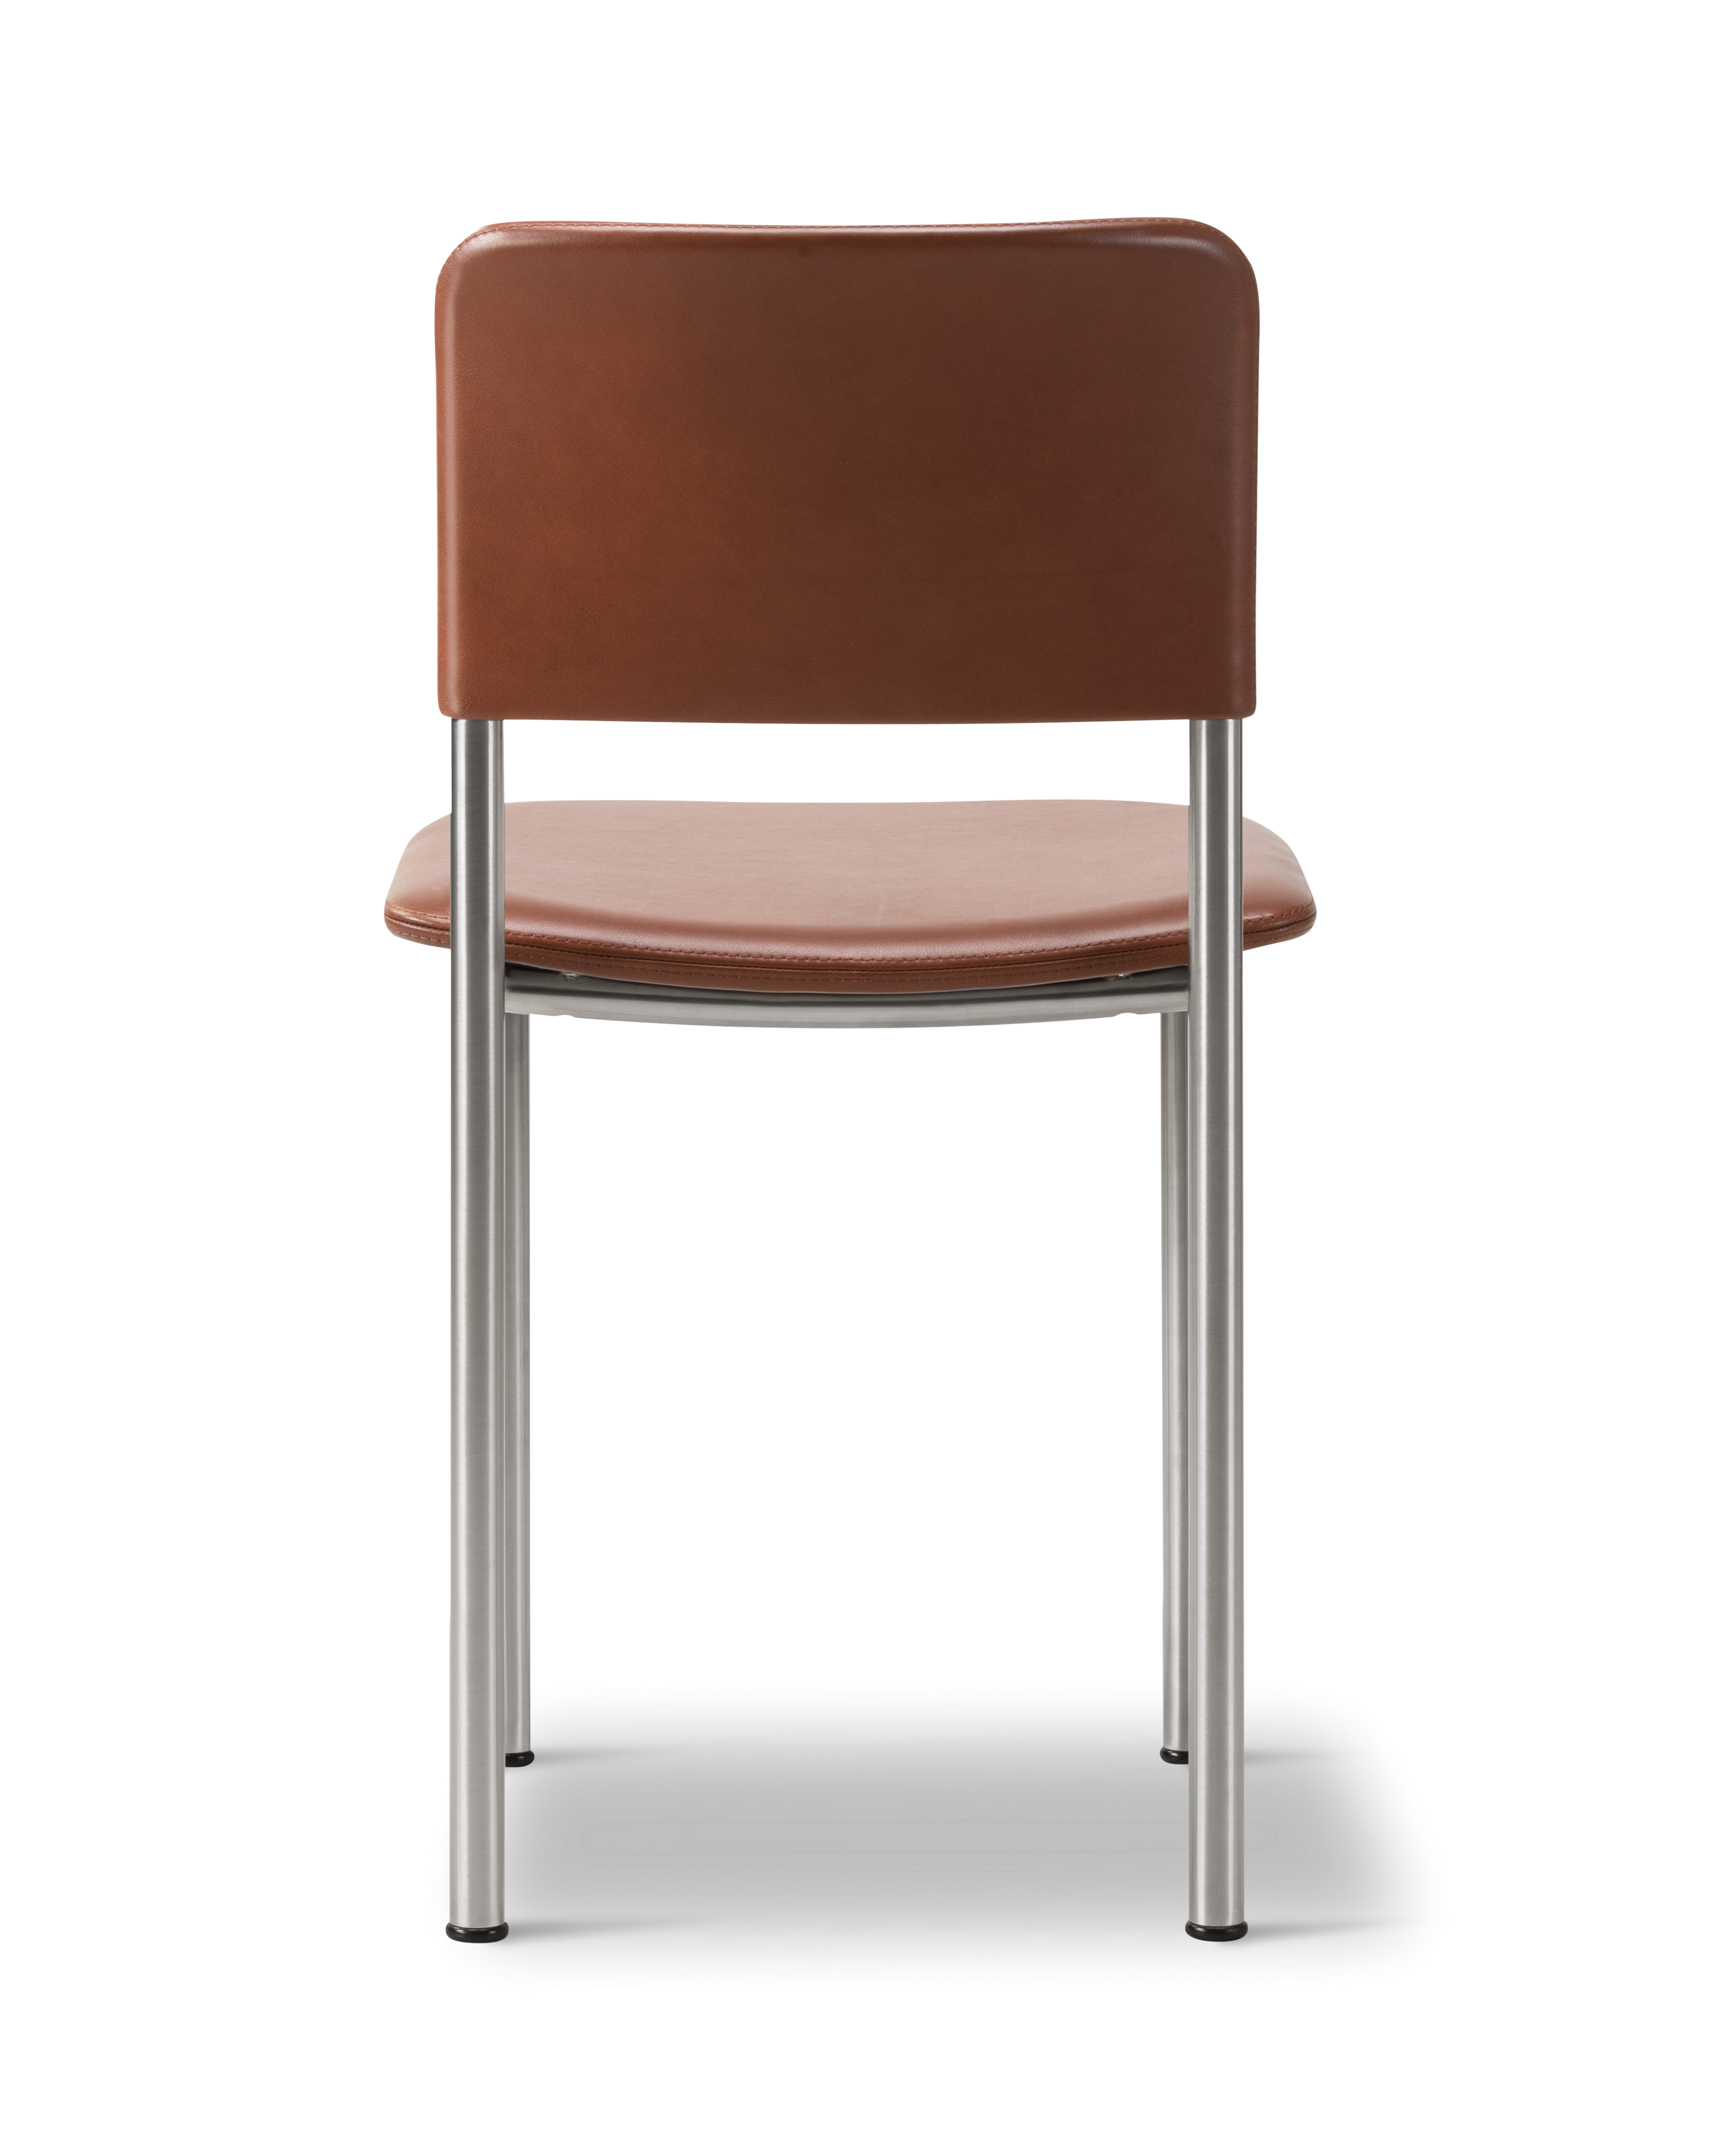 Plan Chair - Leather 92 Max Nutshell / Brushed chrome steel frame